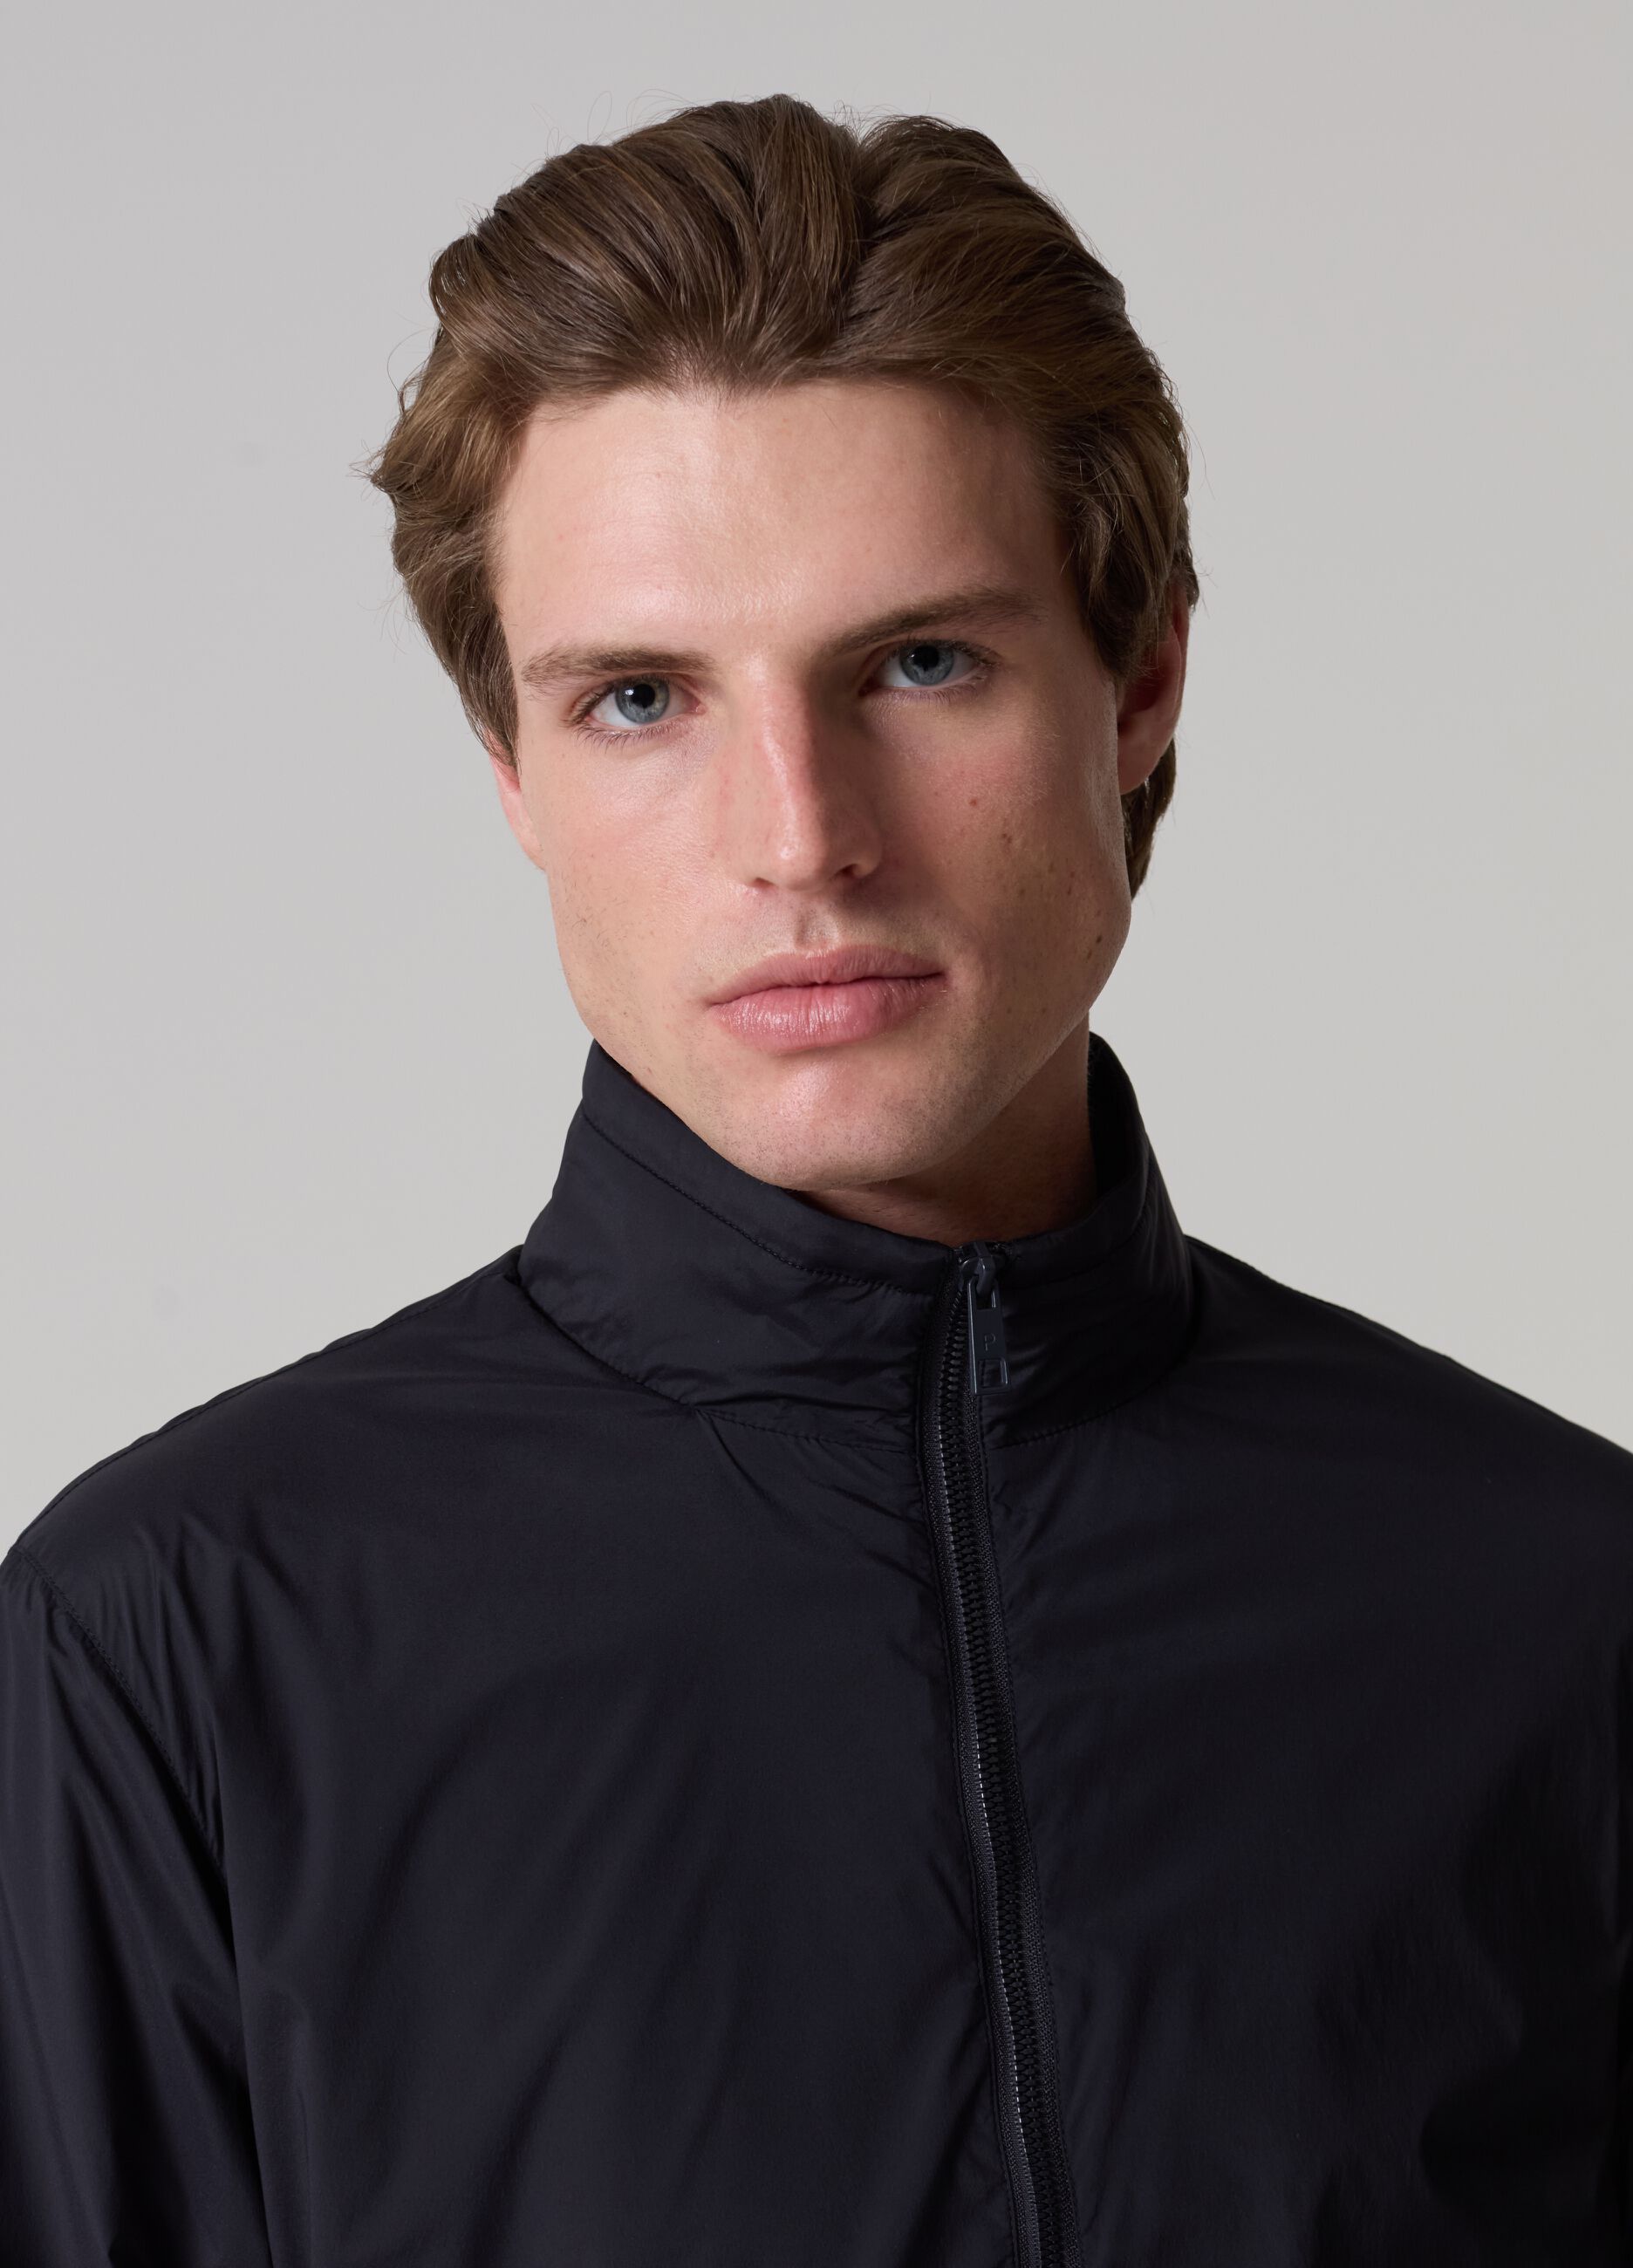 Contemporary short jacket with high neck